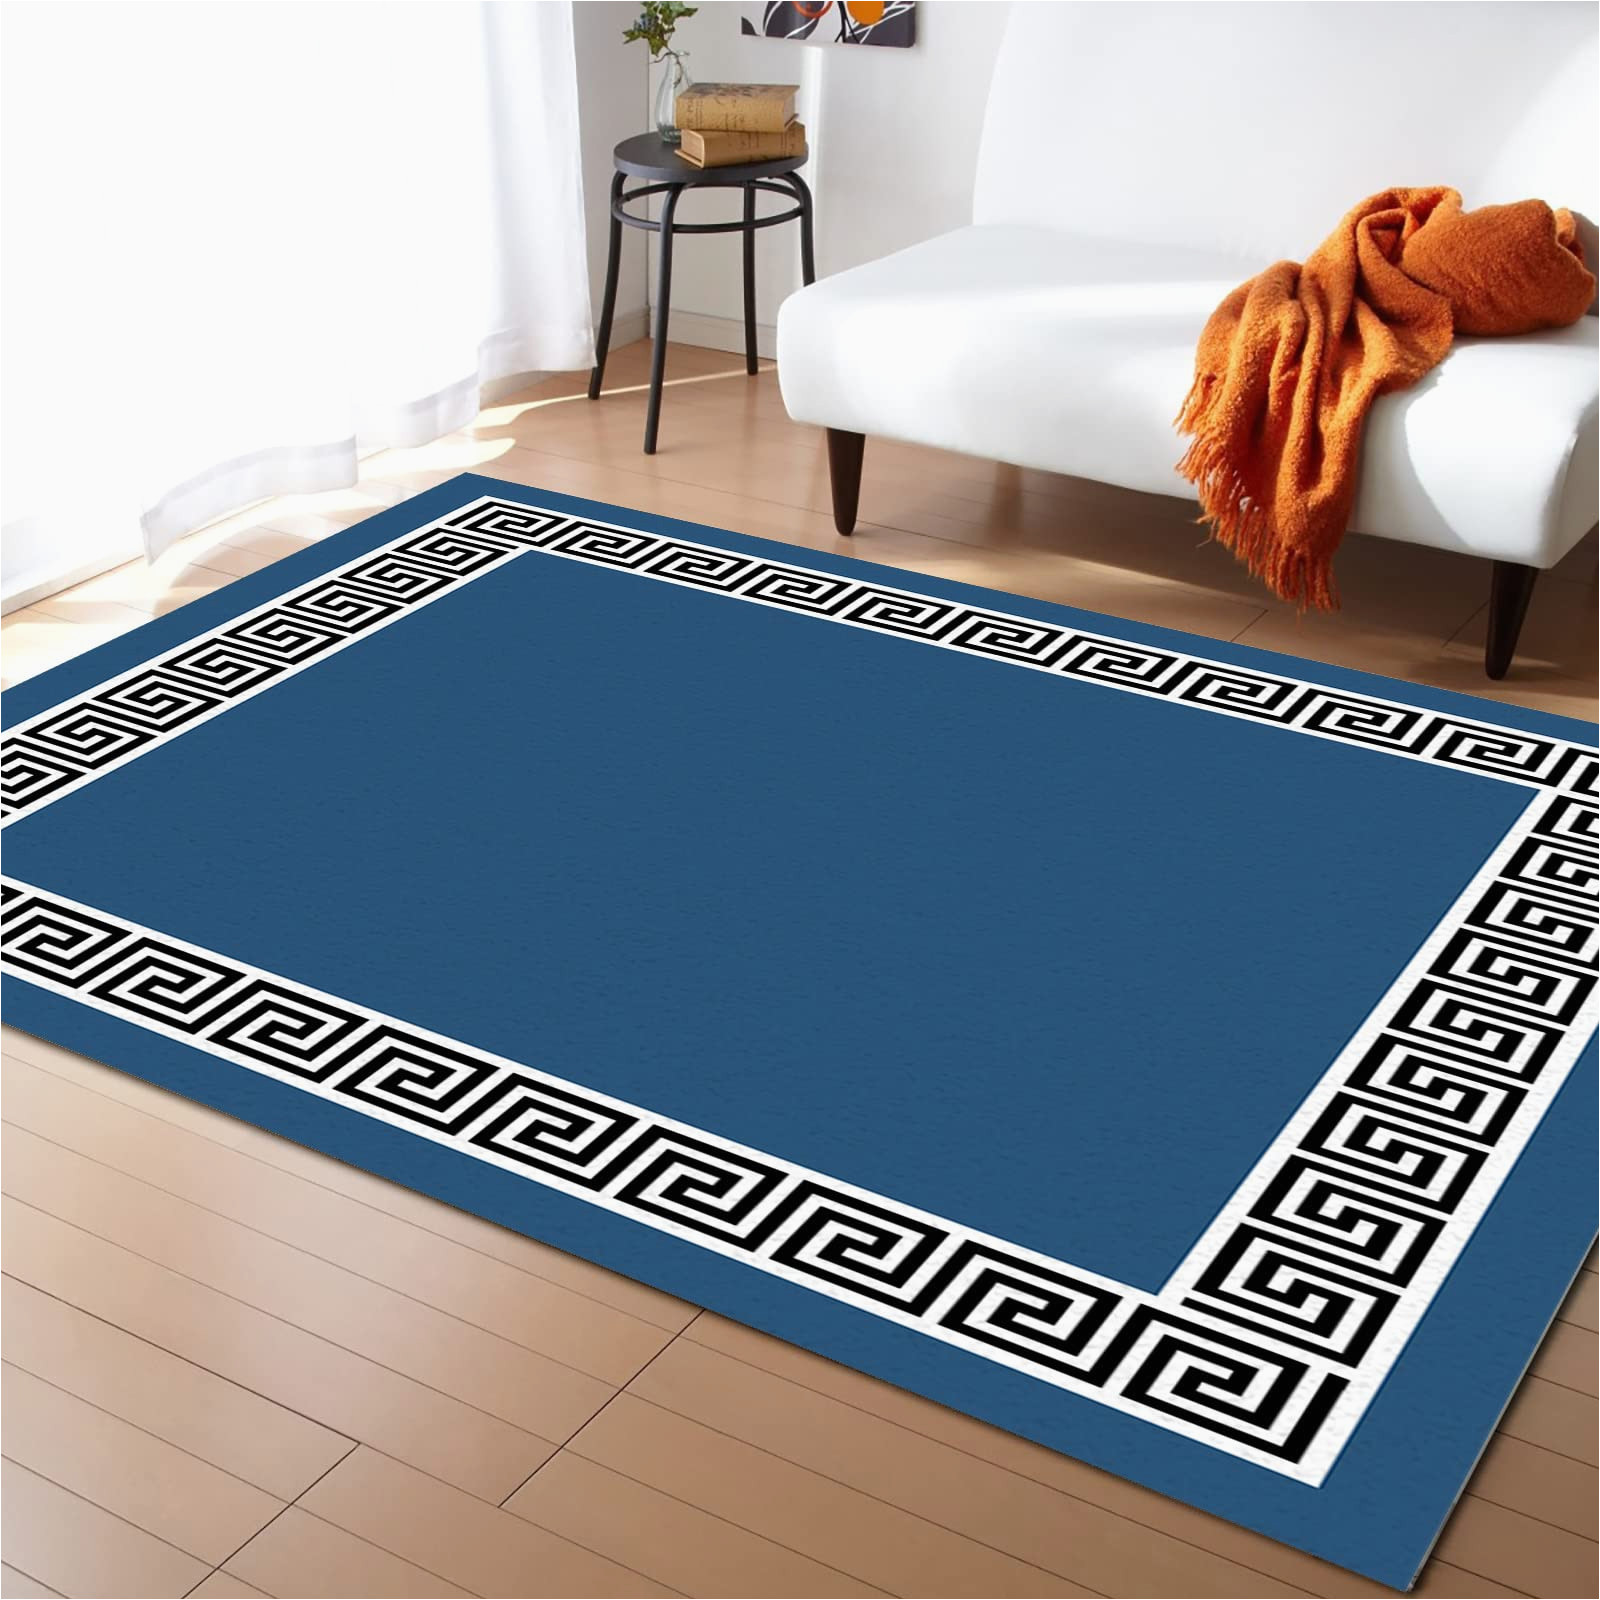 Navy Blue area Rug 4×6 Large Indoor Runner Rug 4′ X 6′, Navy Blue Non-skid Accent area Carpet, Black Modern Geometric Abstract Art Aesthetics Washable area Rug for Kitchen, …